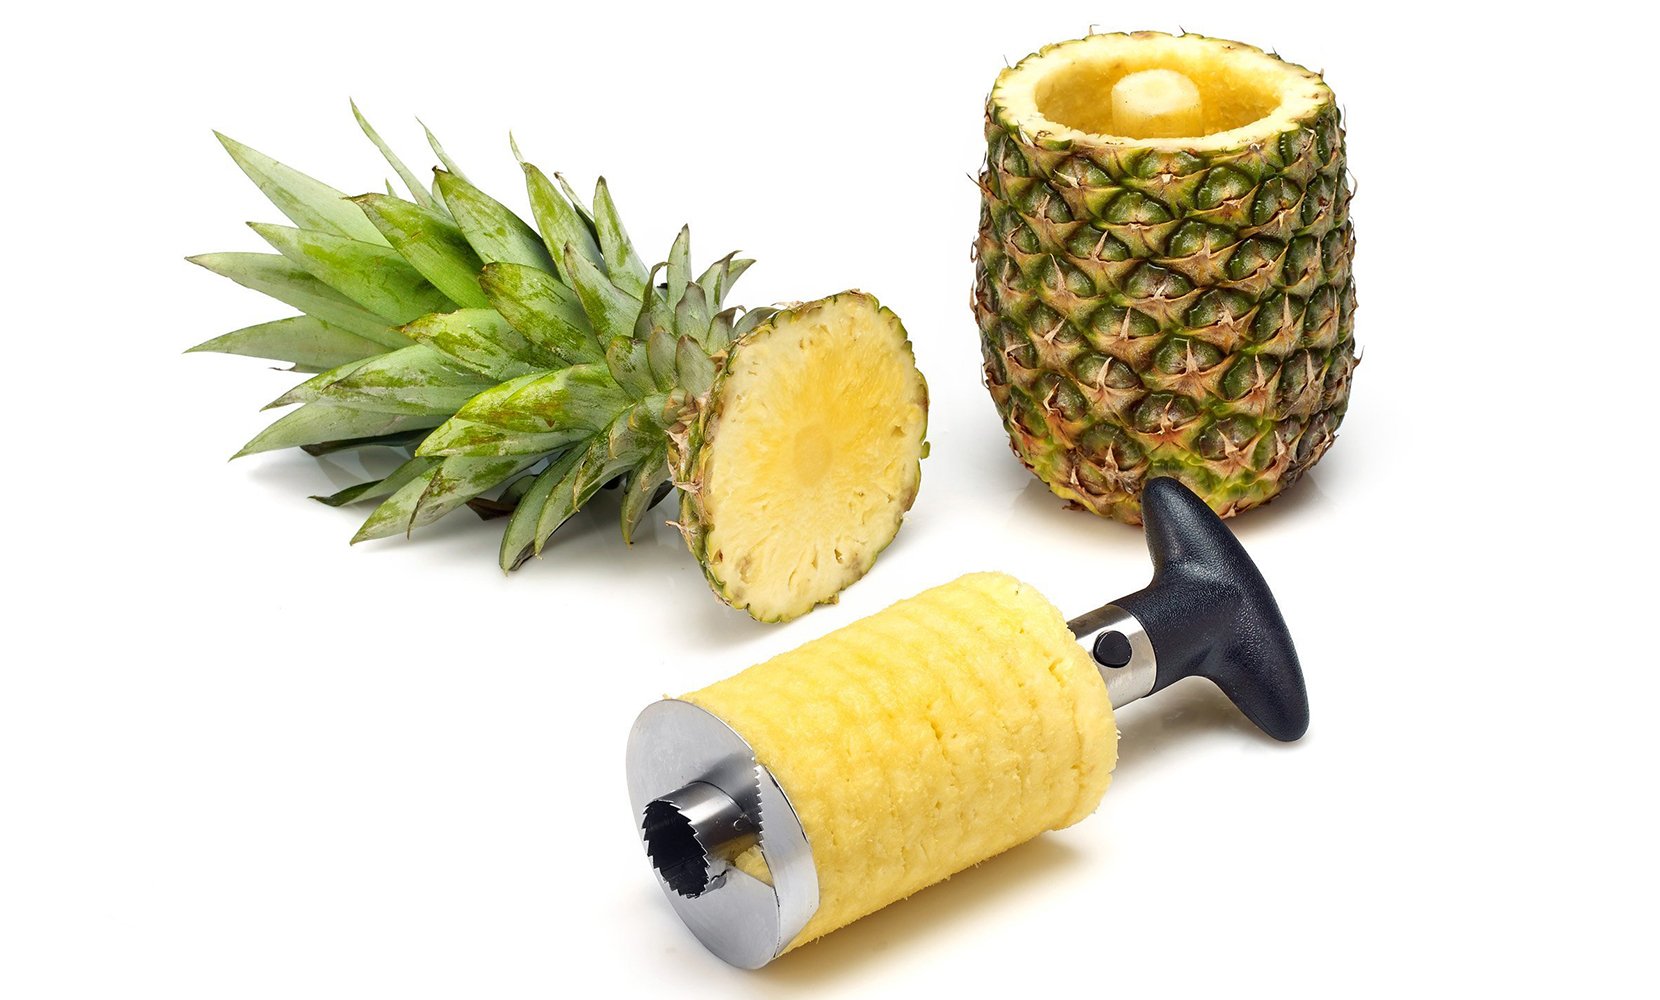 Stainless Steel Perfect Pineapple Corer and Cutter